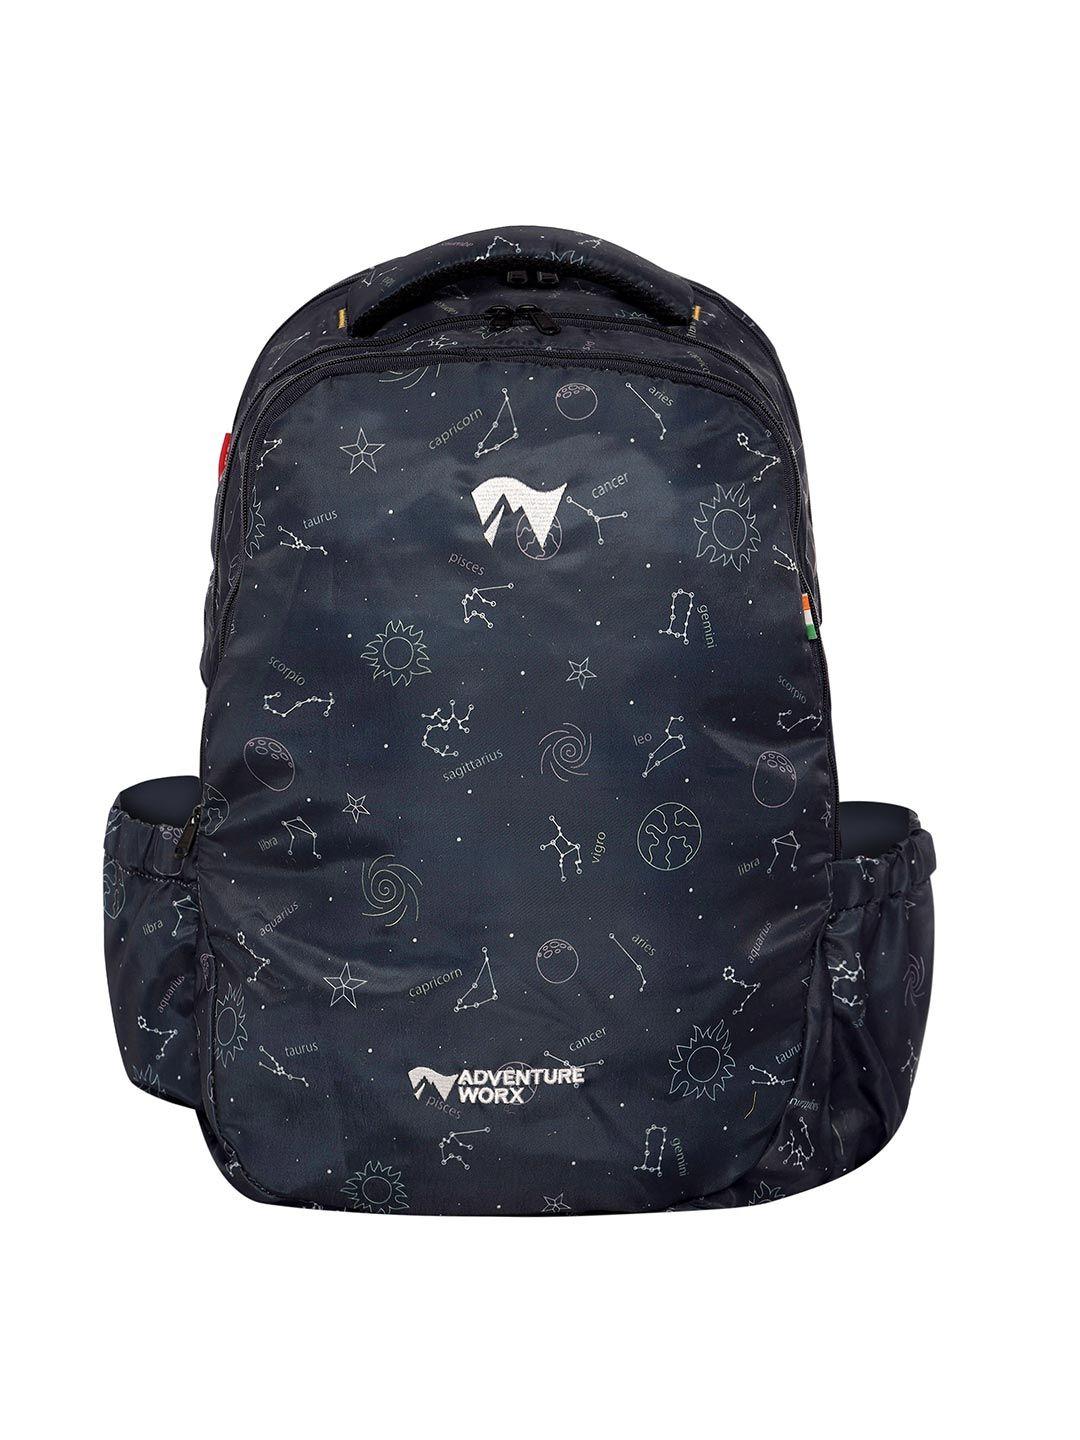 adventure worx unisex graphic printed durabase backpack with compression straps